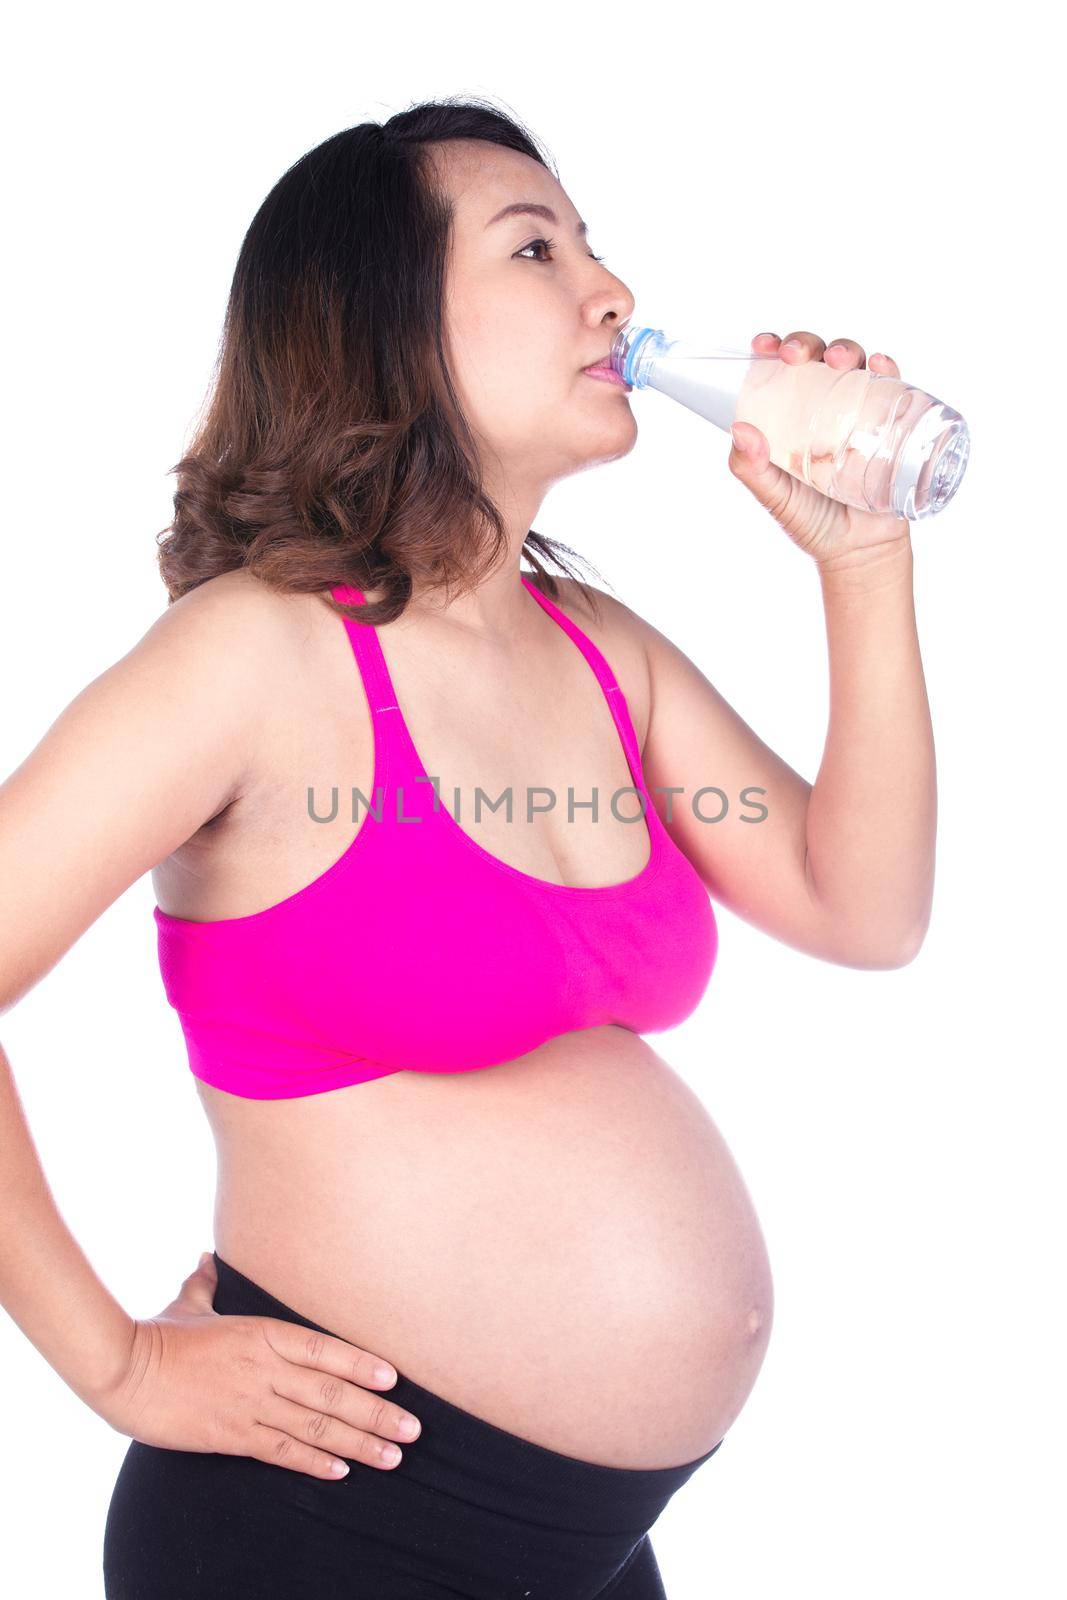 pregnant woman drink water from a bottle isolated on white background